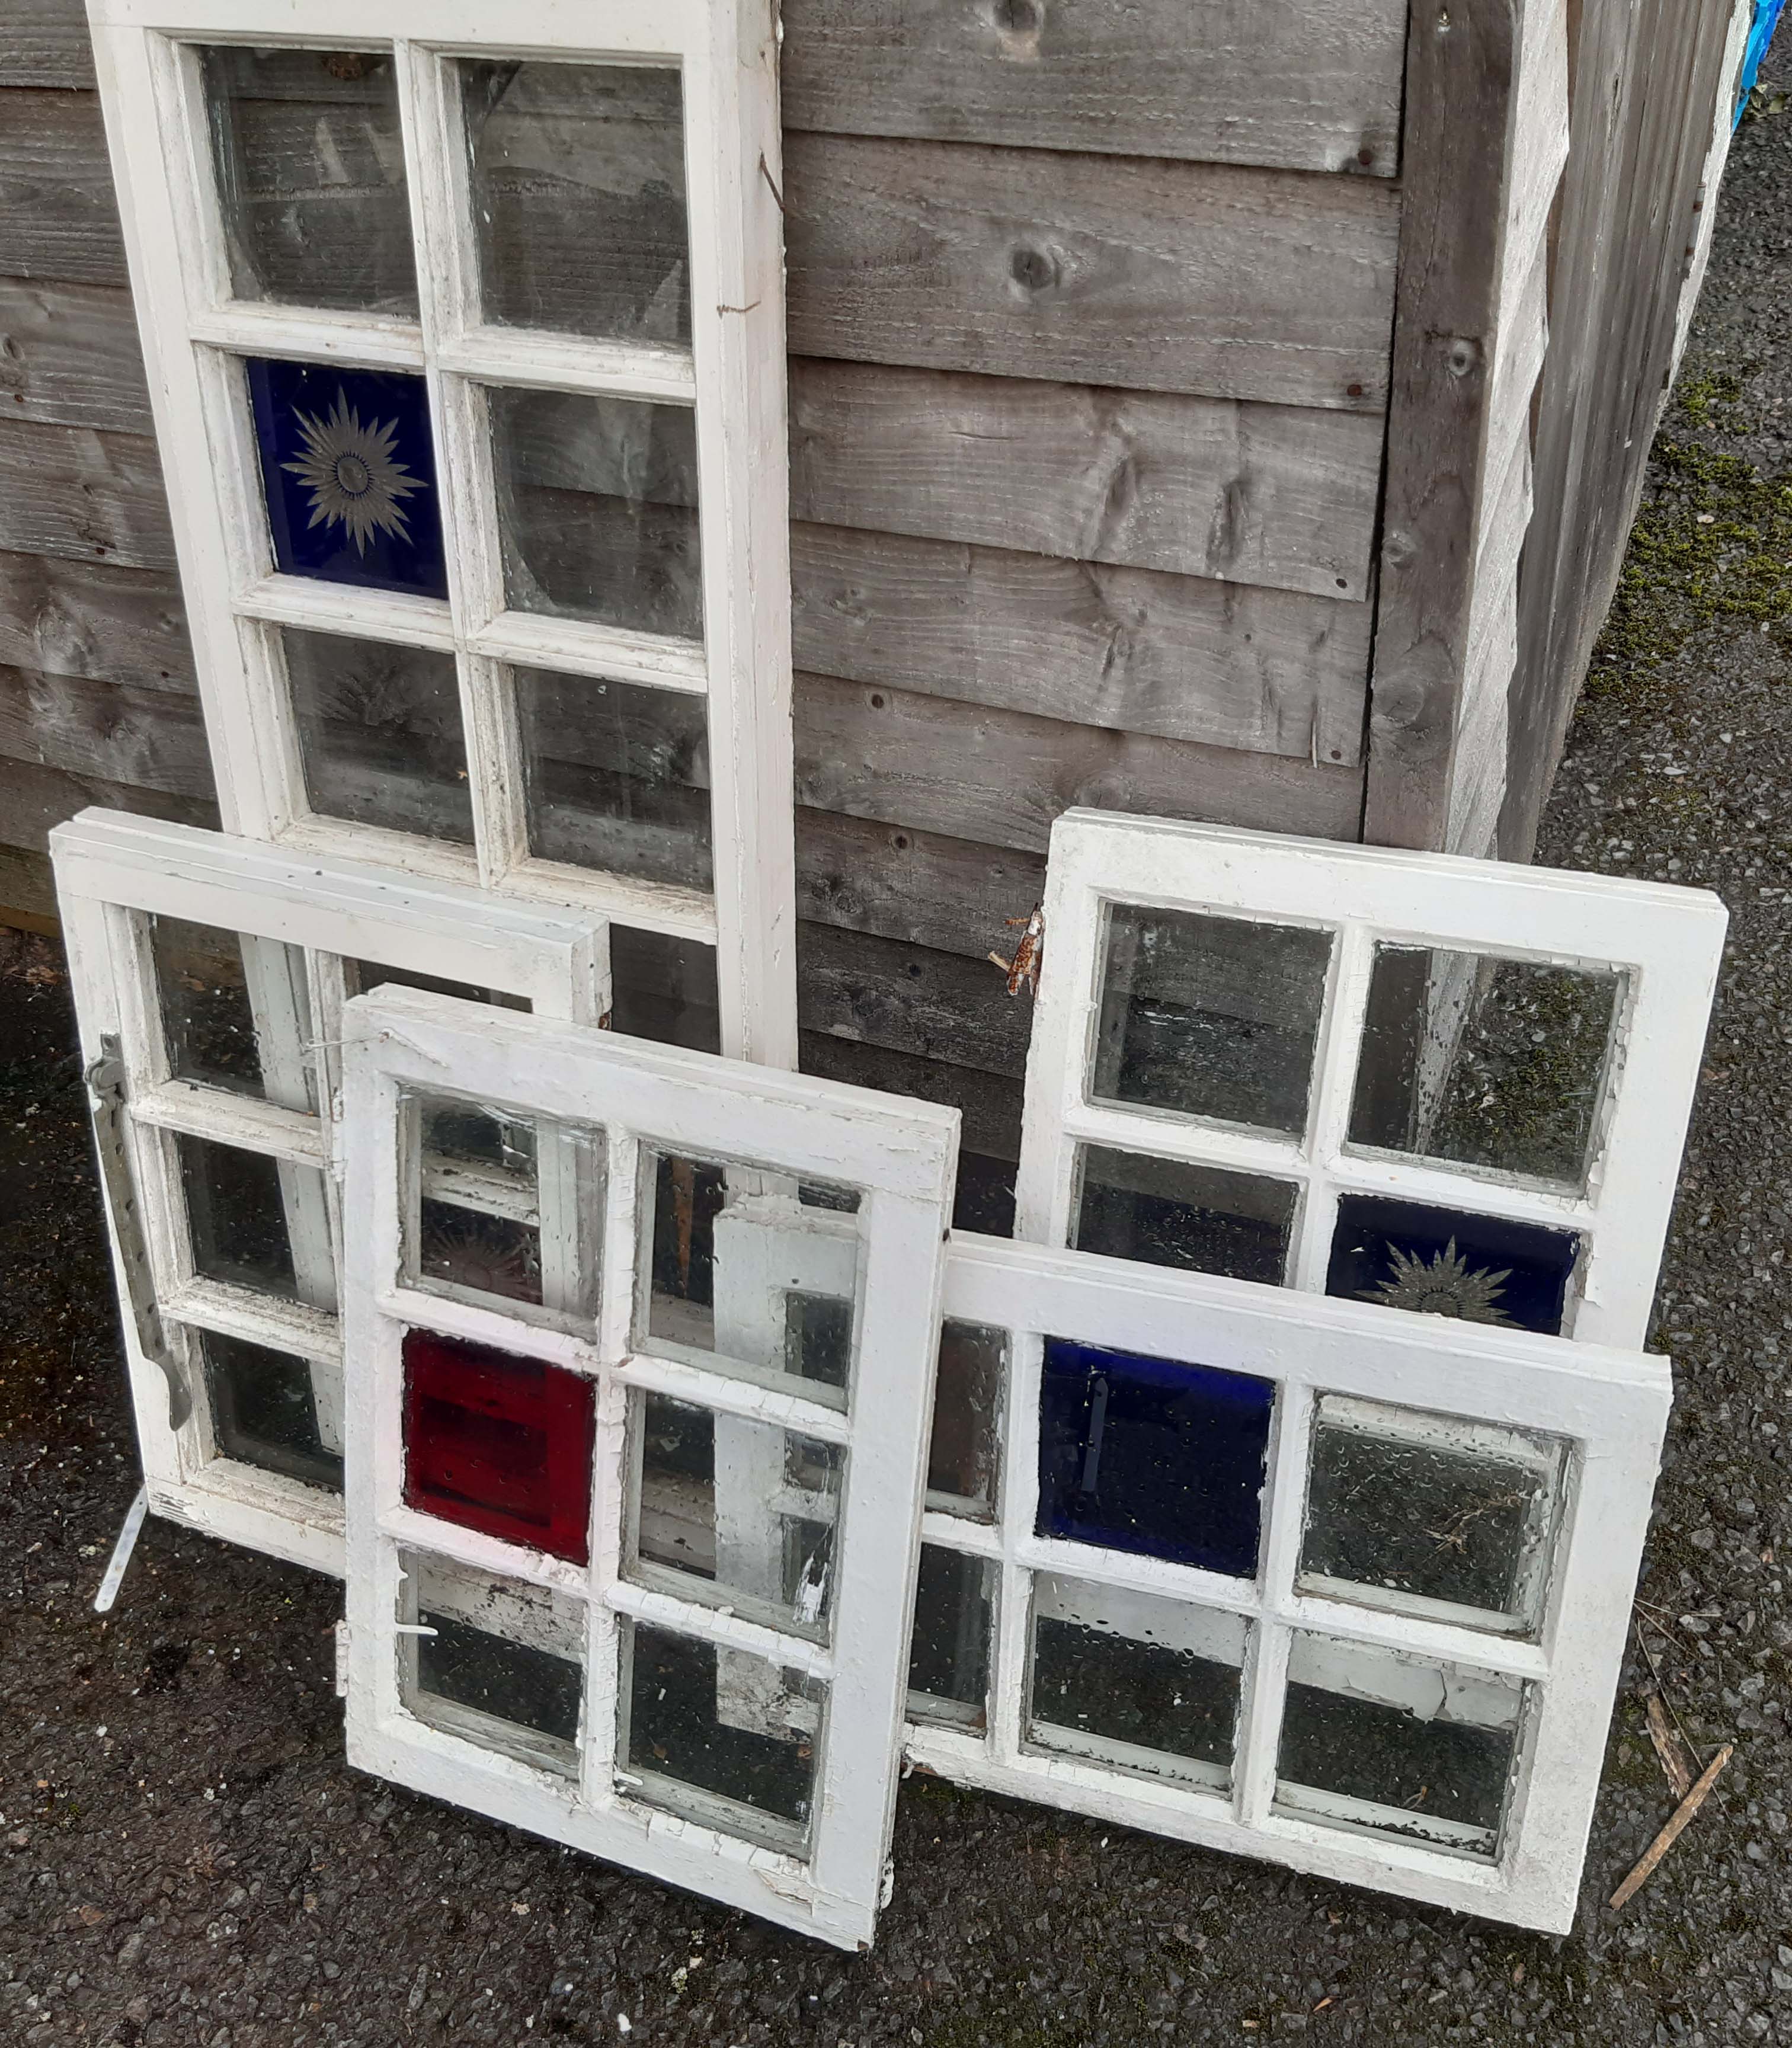 Five old casement windows, some with blue stained panels